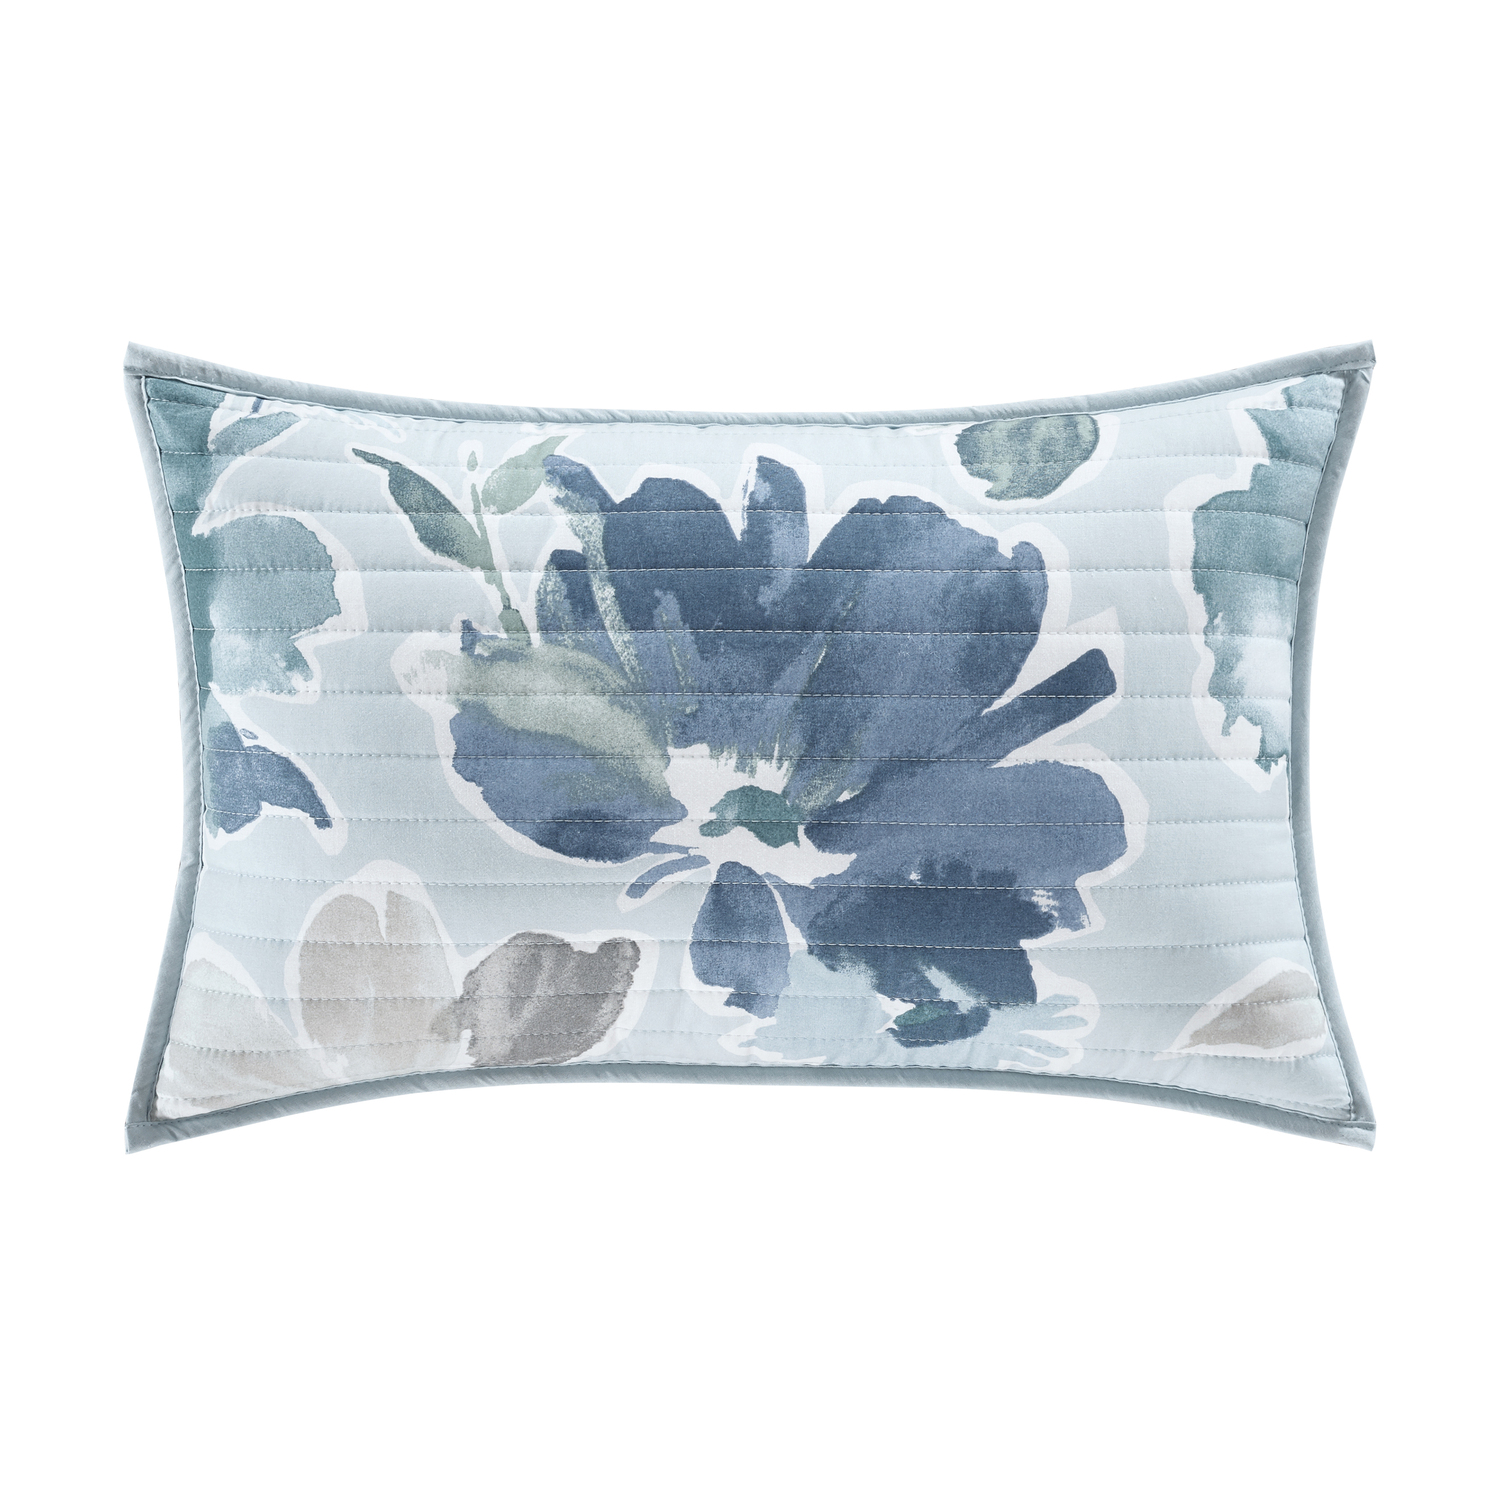 J. by J. Queen New York Mikayla Square Throw Pillow - Blue - 18 in